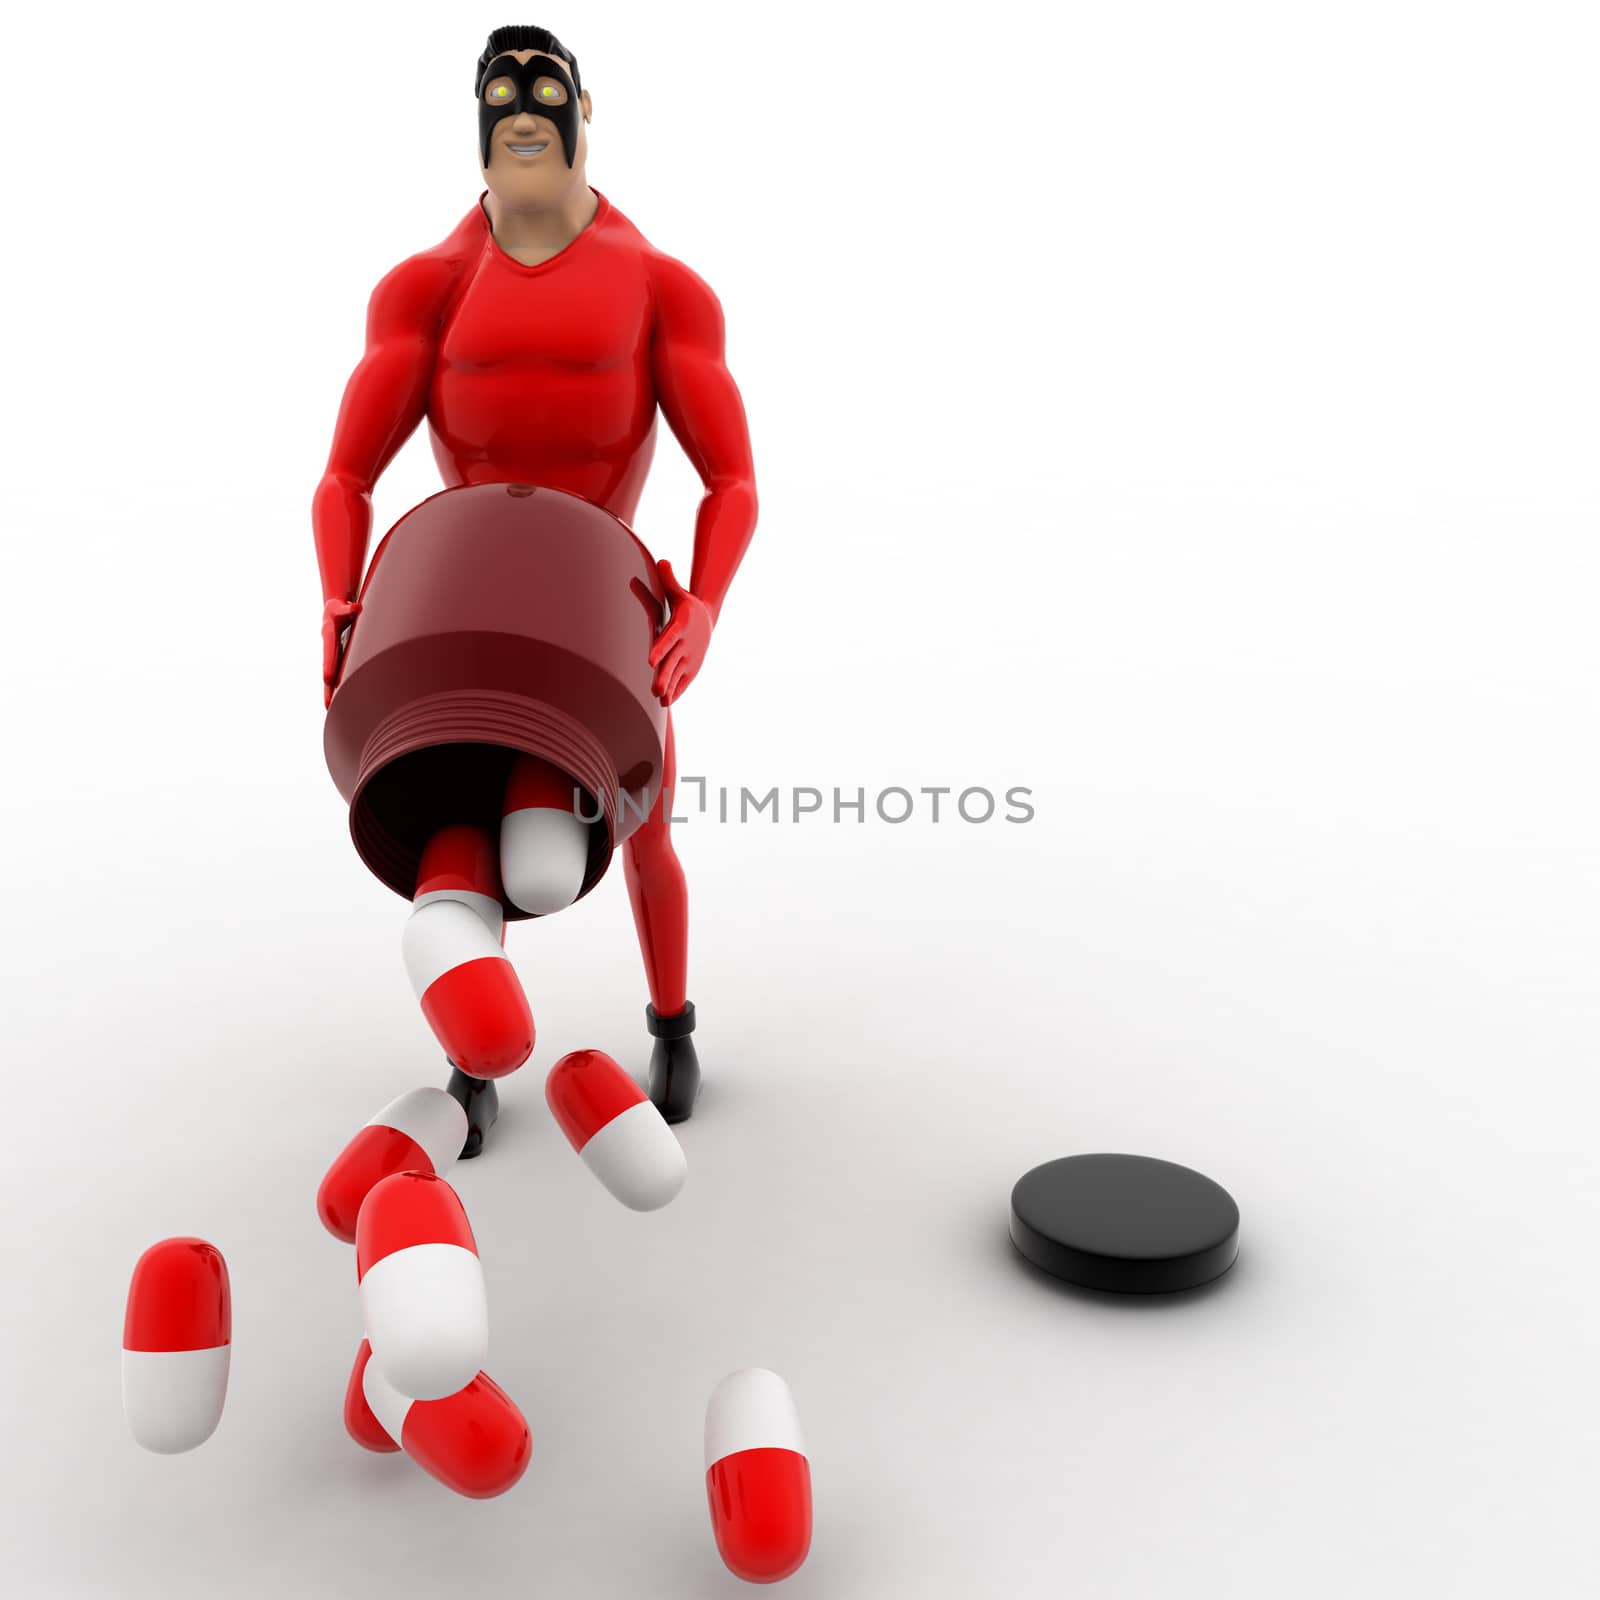 3d superhero throw medicine capsules concept on white background, front angle view